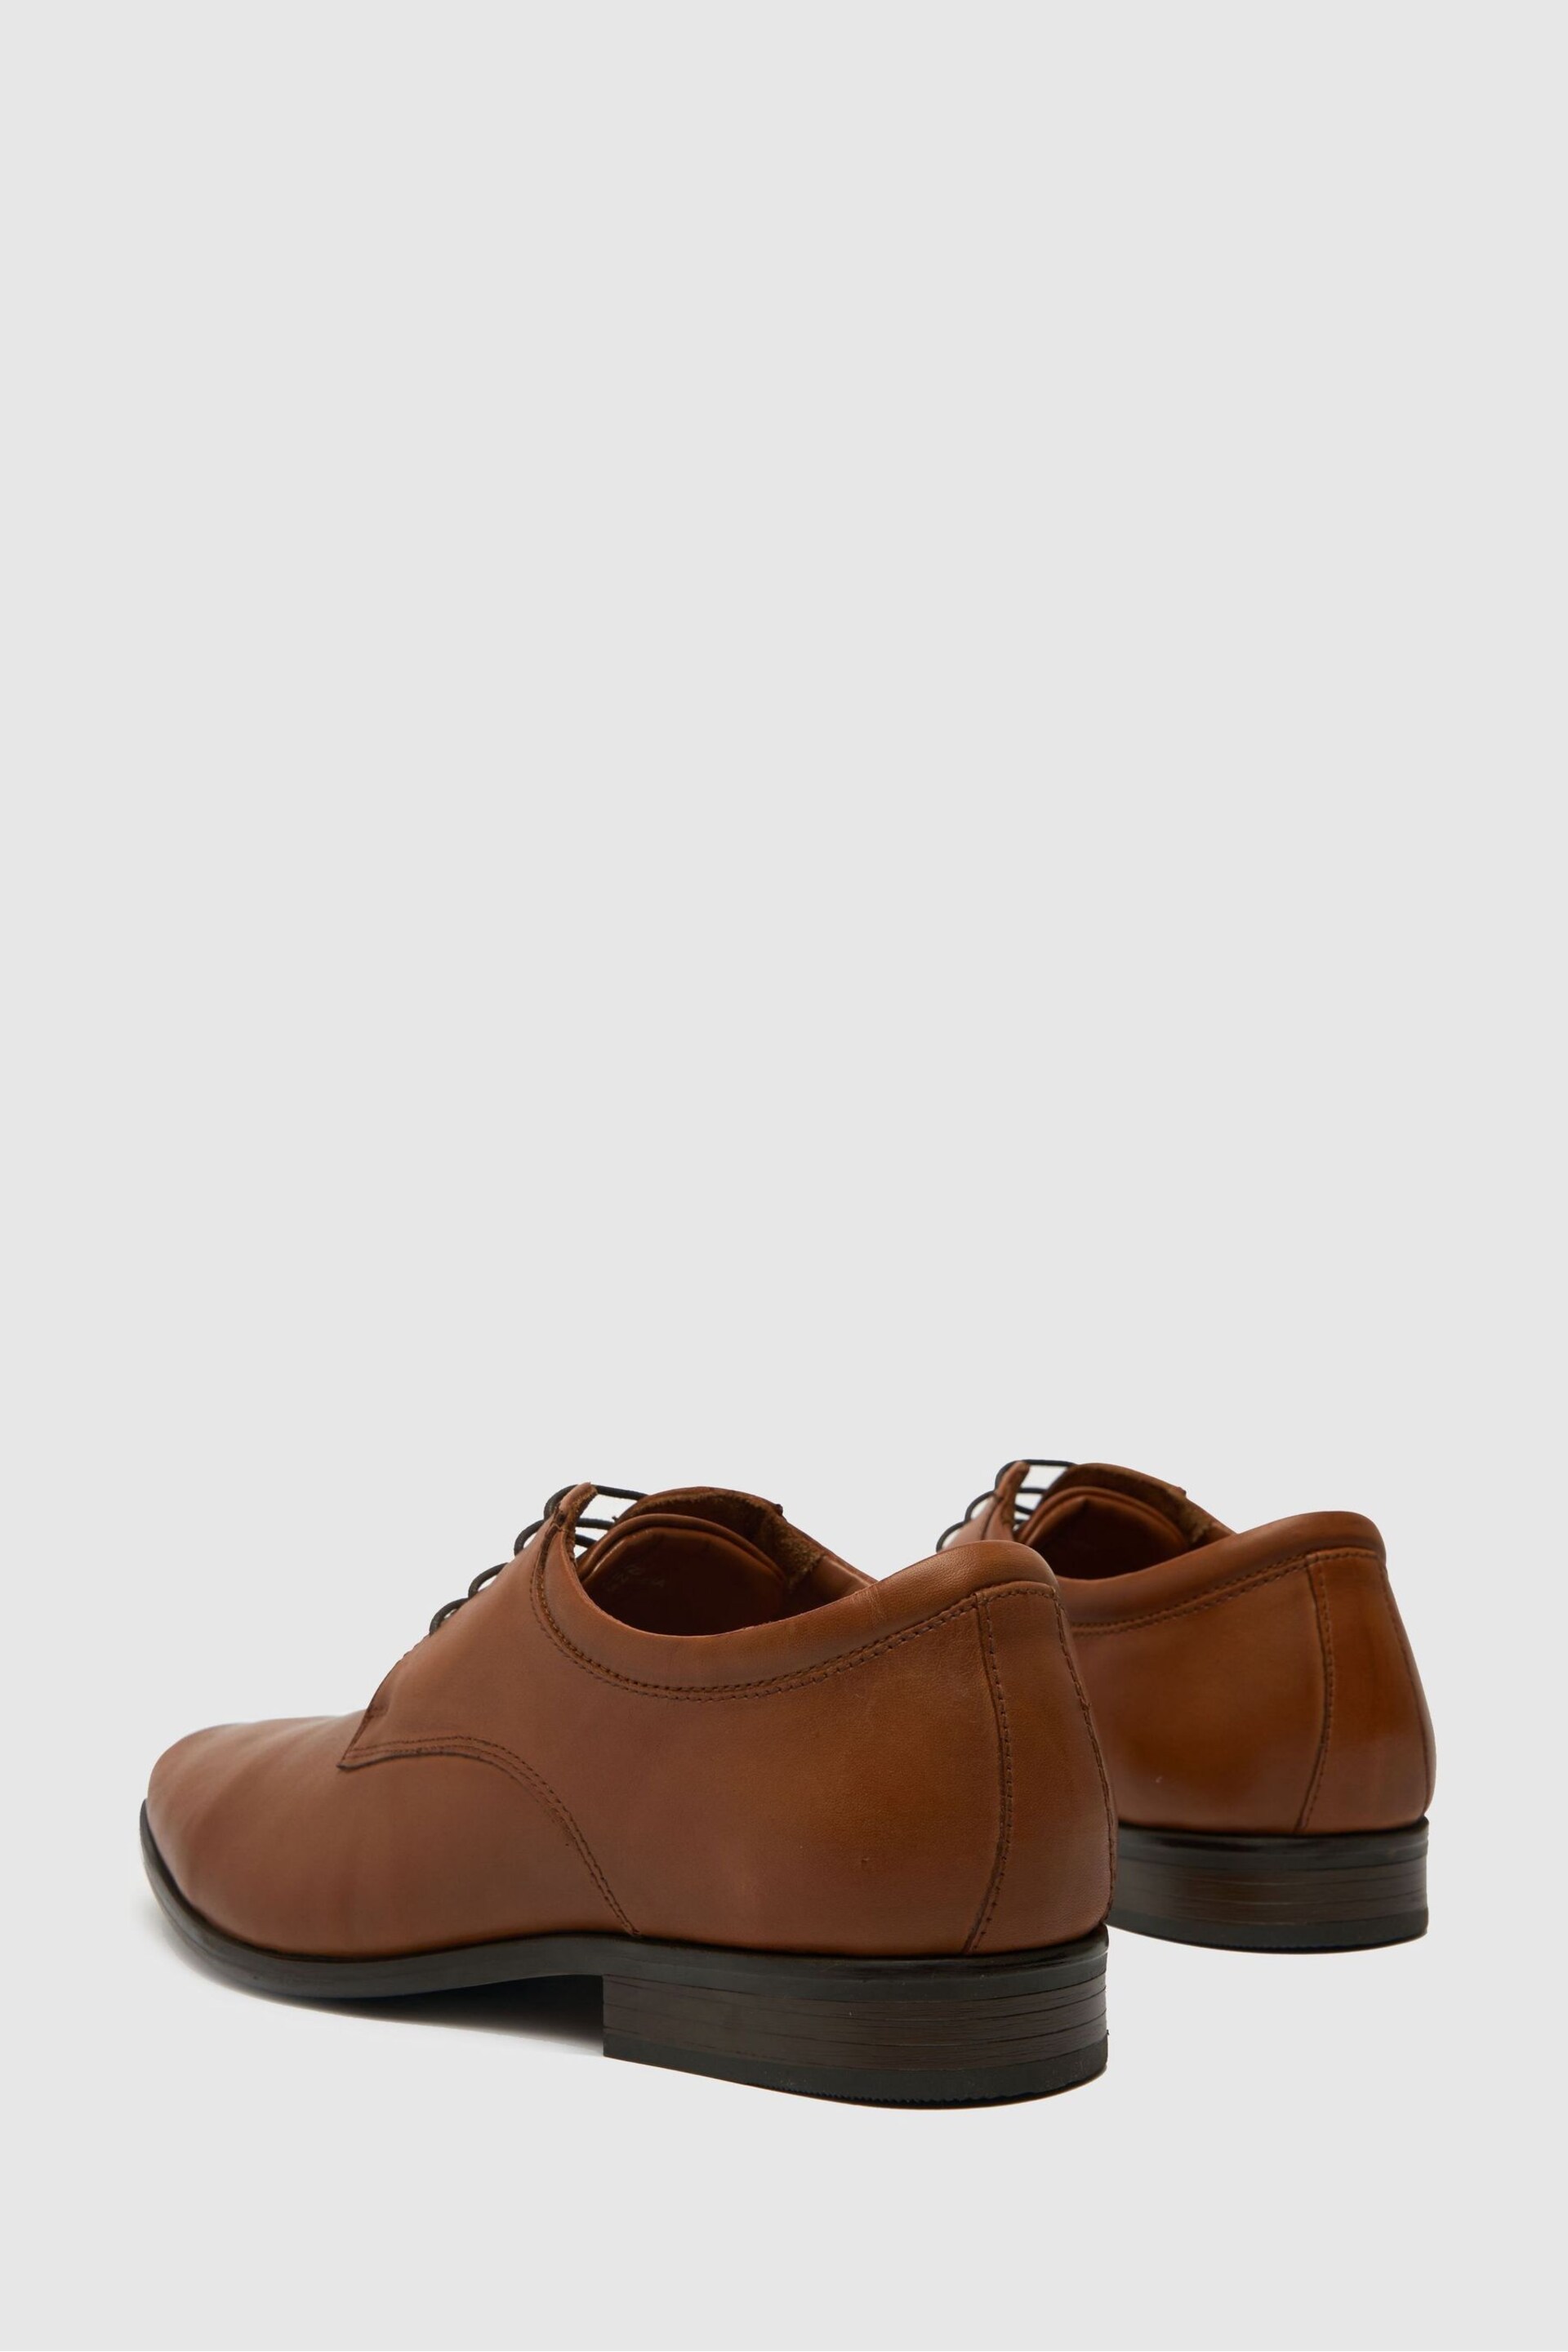 Schuh Ray Leather Derby Shoes - Image 3 of 4